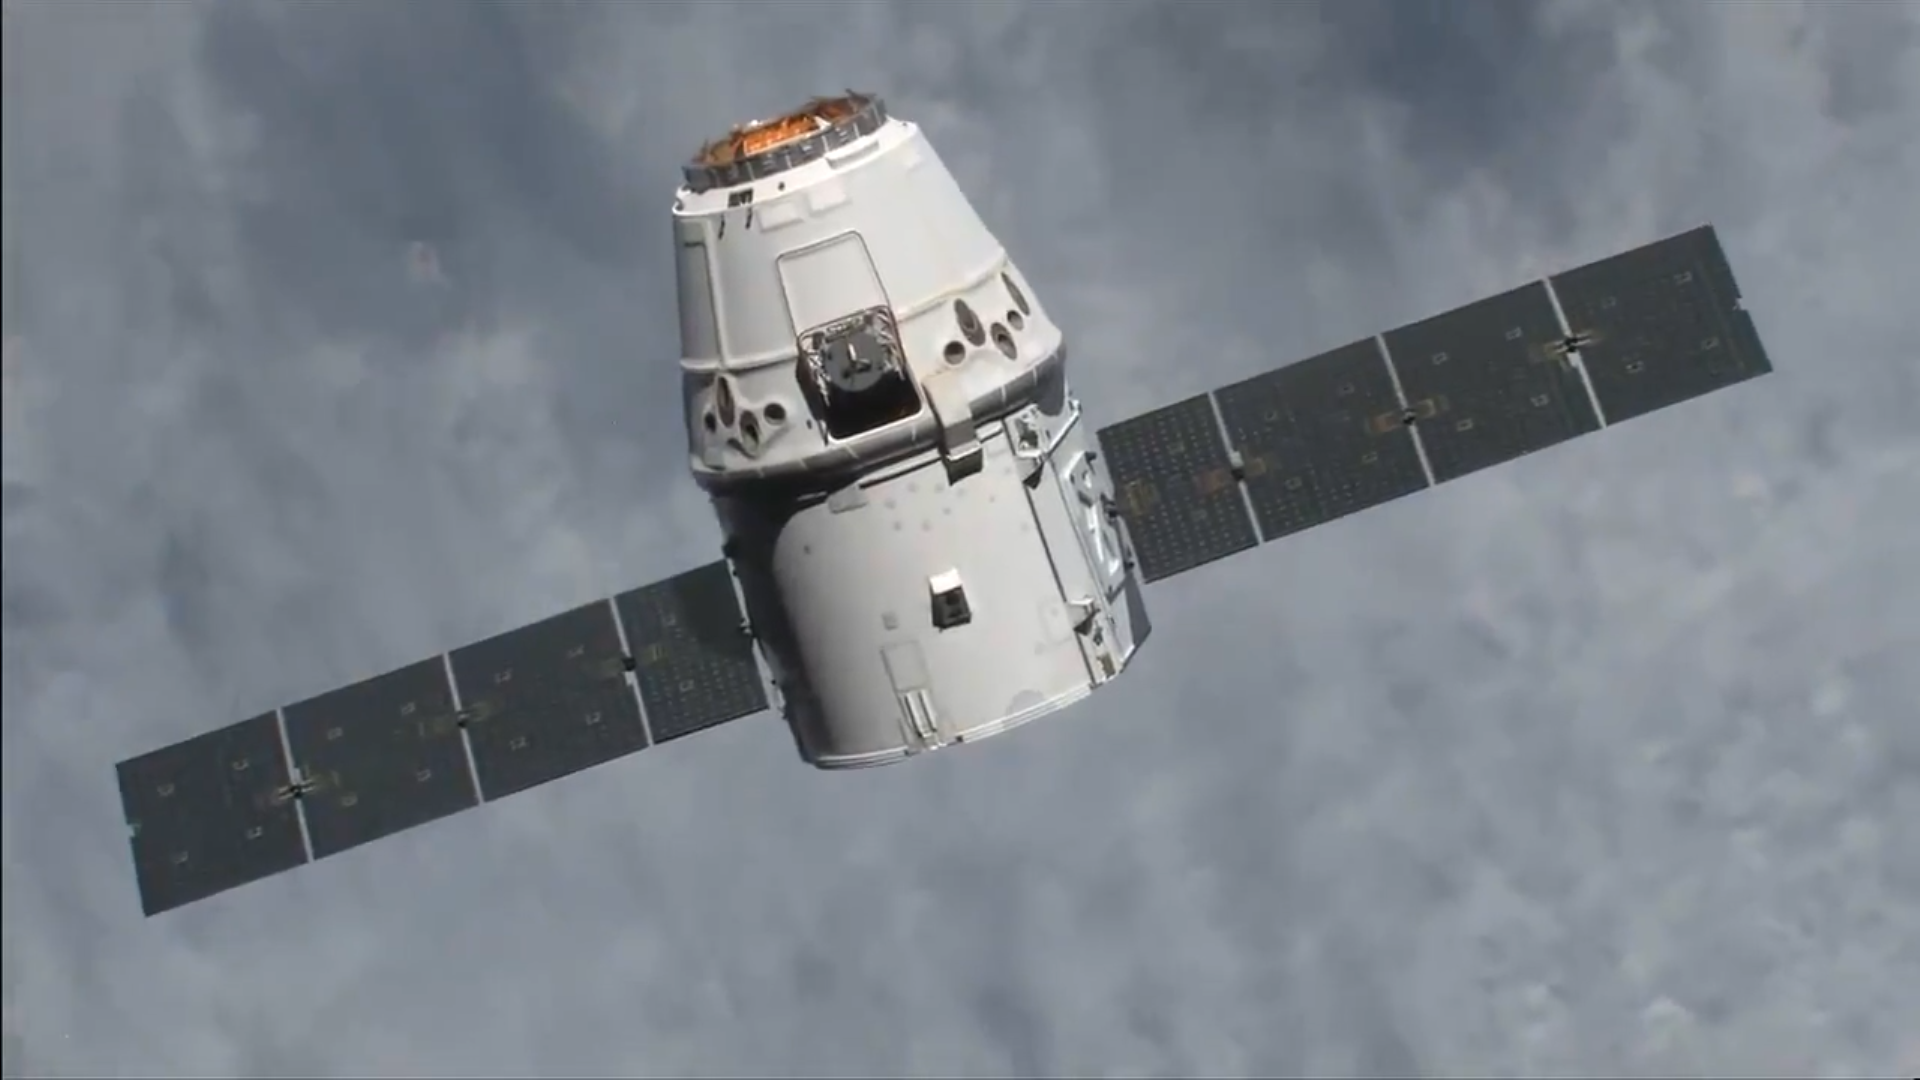 SpaceX cargo capsule Dragon successfully returned to earth the mice and other cargo